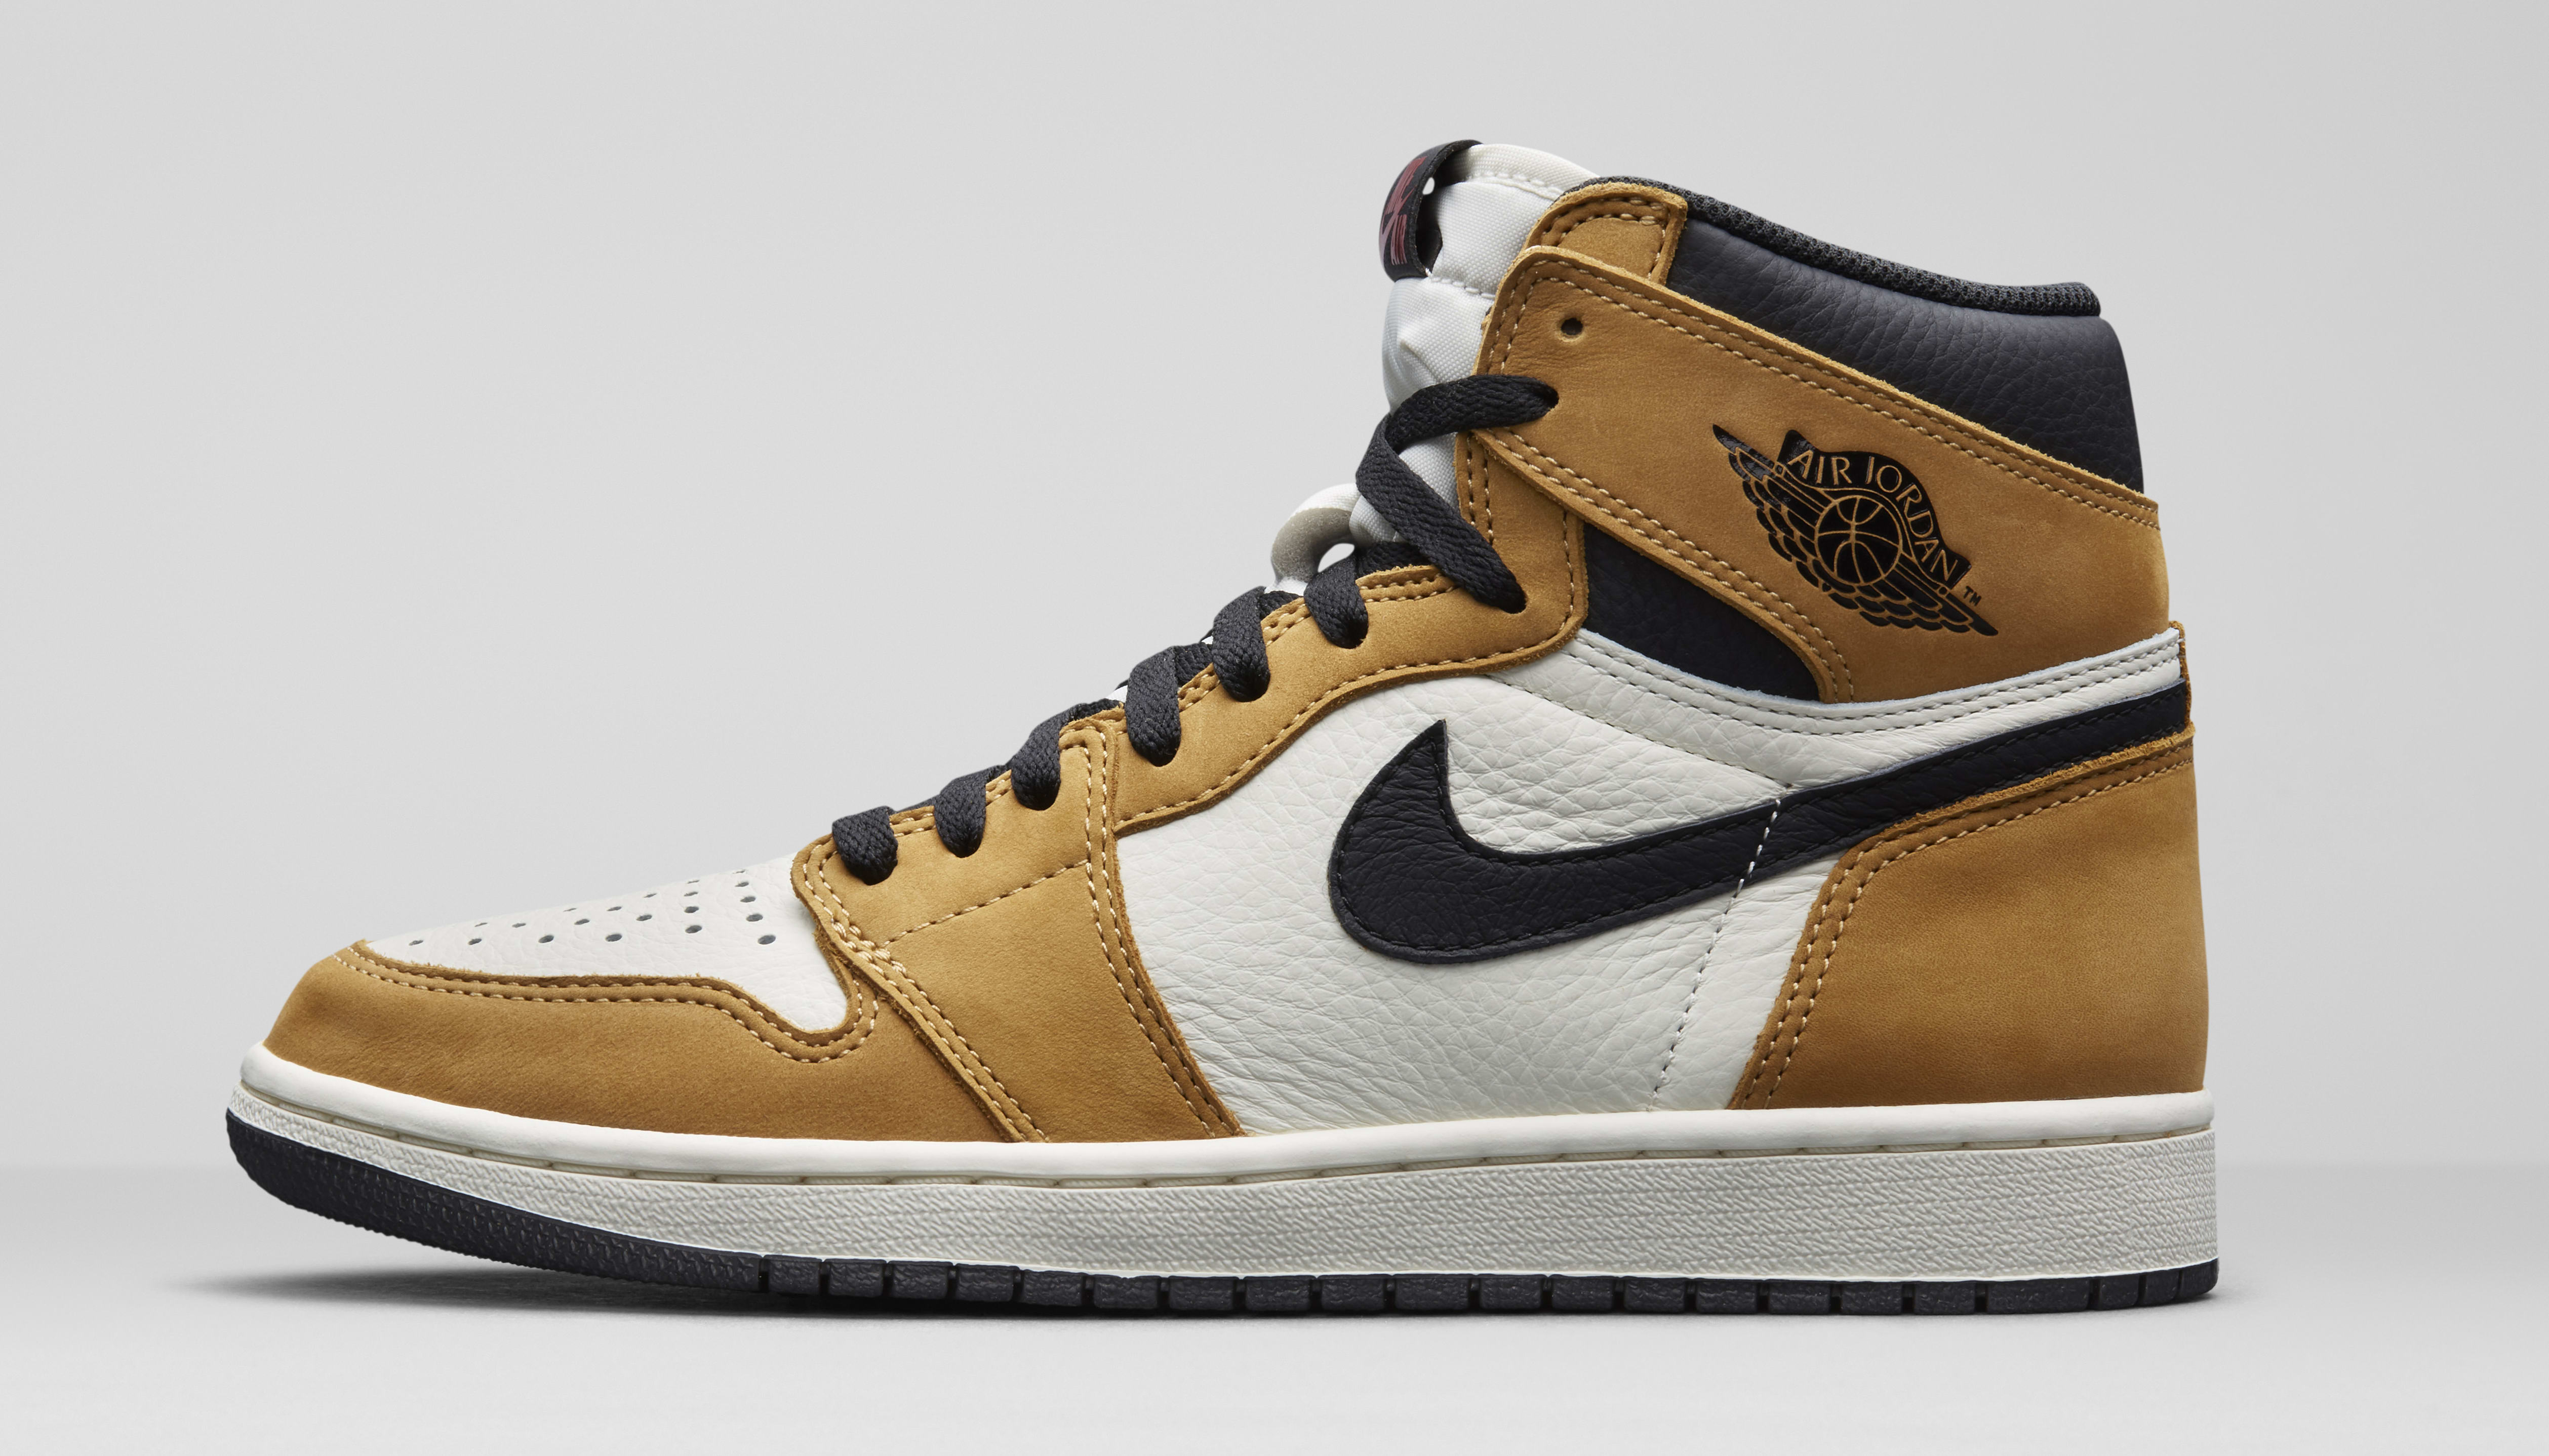 Air Jordan 1 Retro High OG 'Rookie of the Year' Release Date 